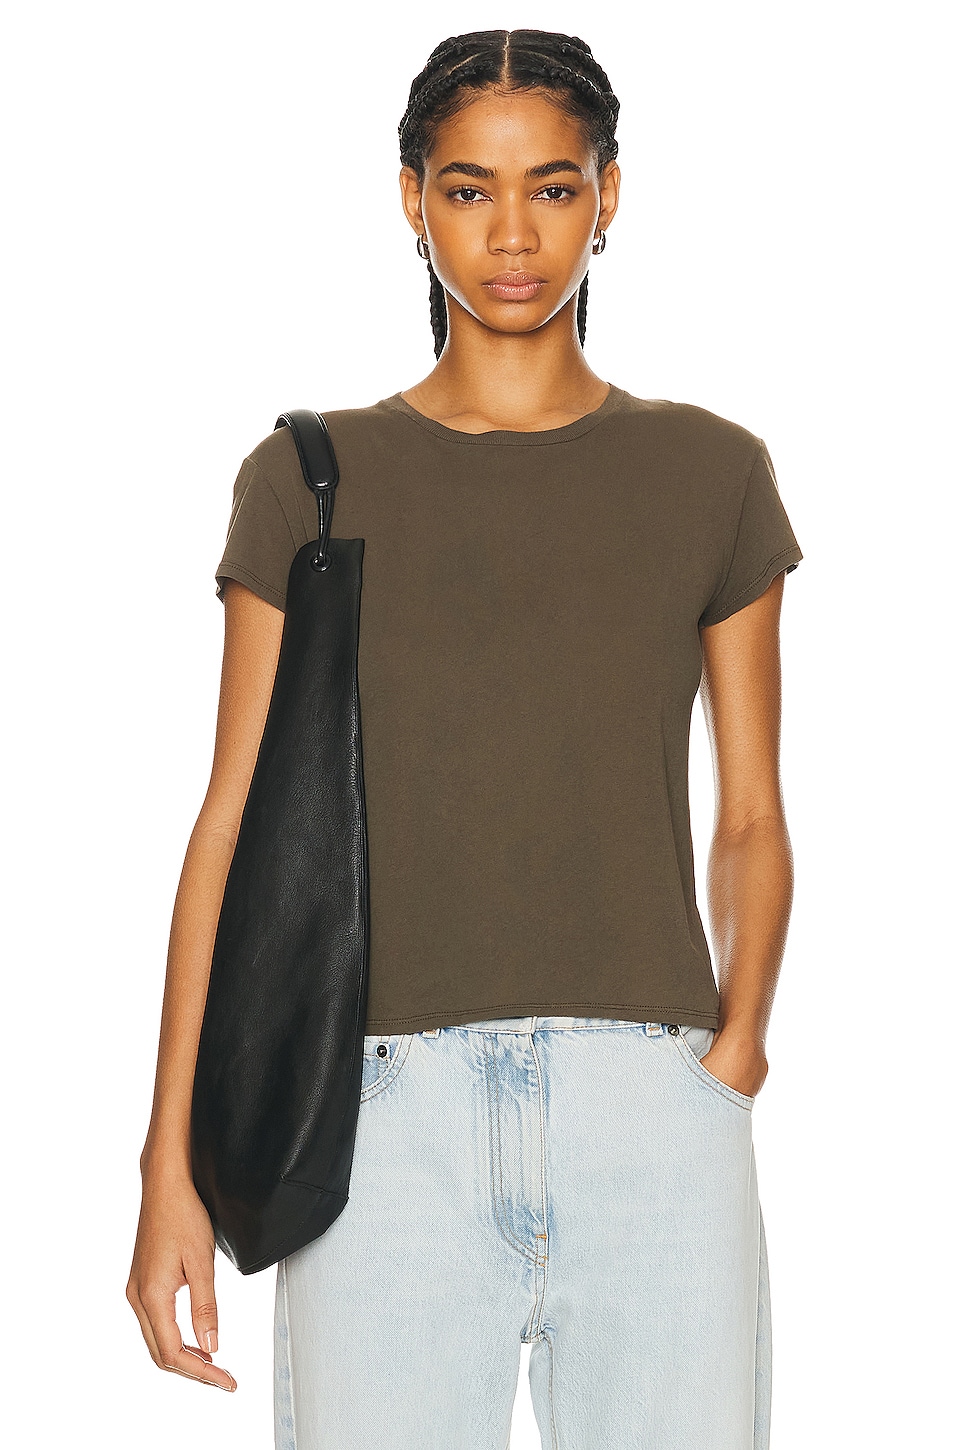 Image 1 of The Row Tori Top in GREY TAUPE